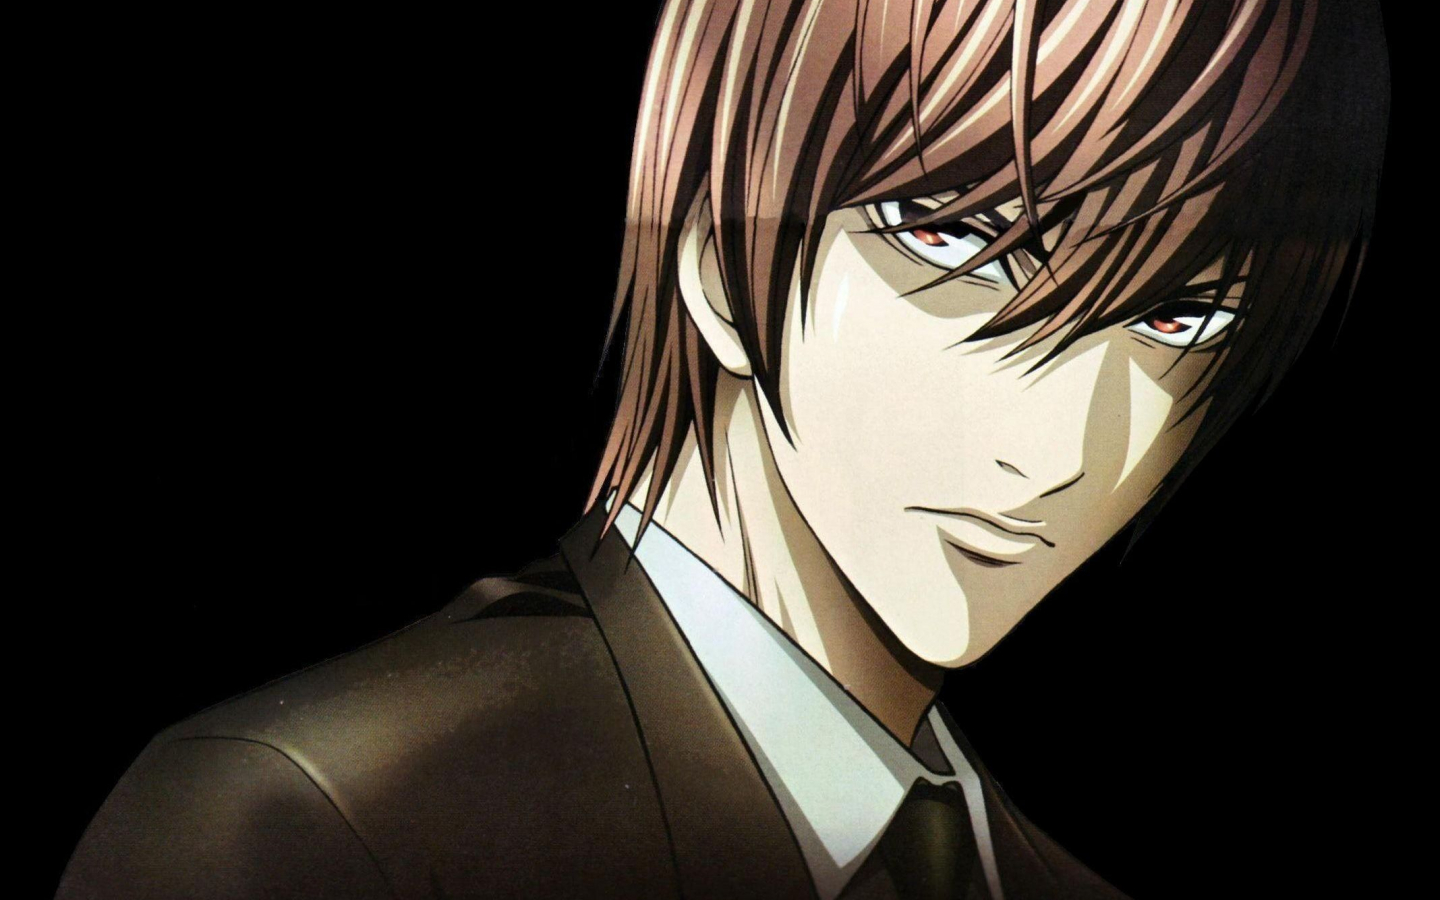 Free download Light Yagami HD Wallpaper [2135x1578] for your Desktop, Mobile & Tablet. Explore Light Yagami Wallpaper. Light Yagami Wallpaper, Yagami Light Wallpaper, Light Wallpaper